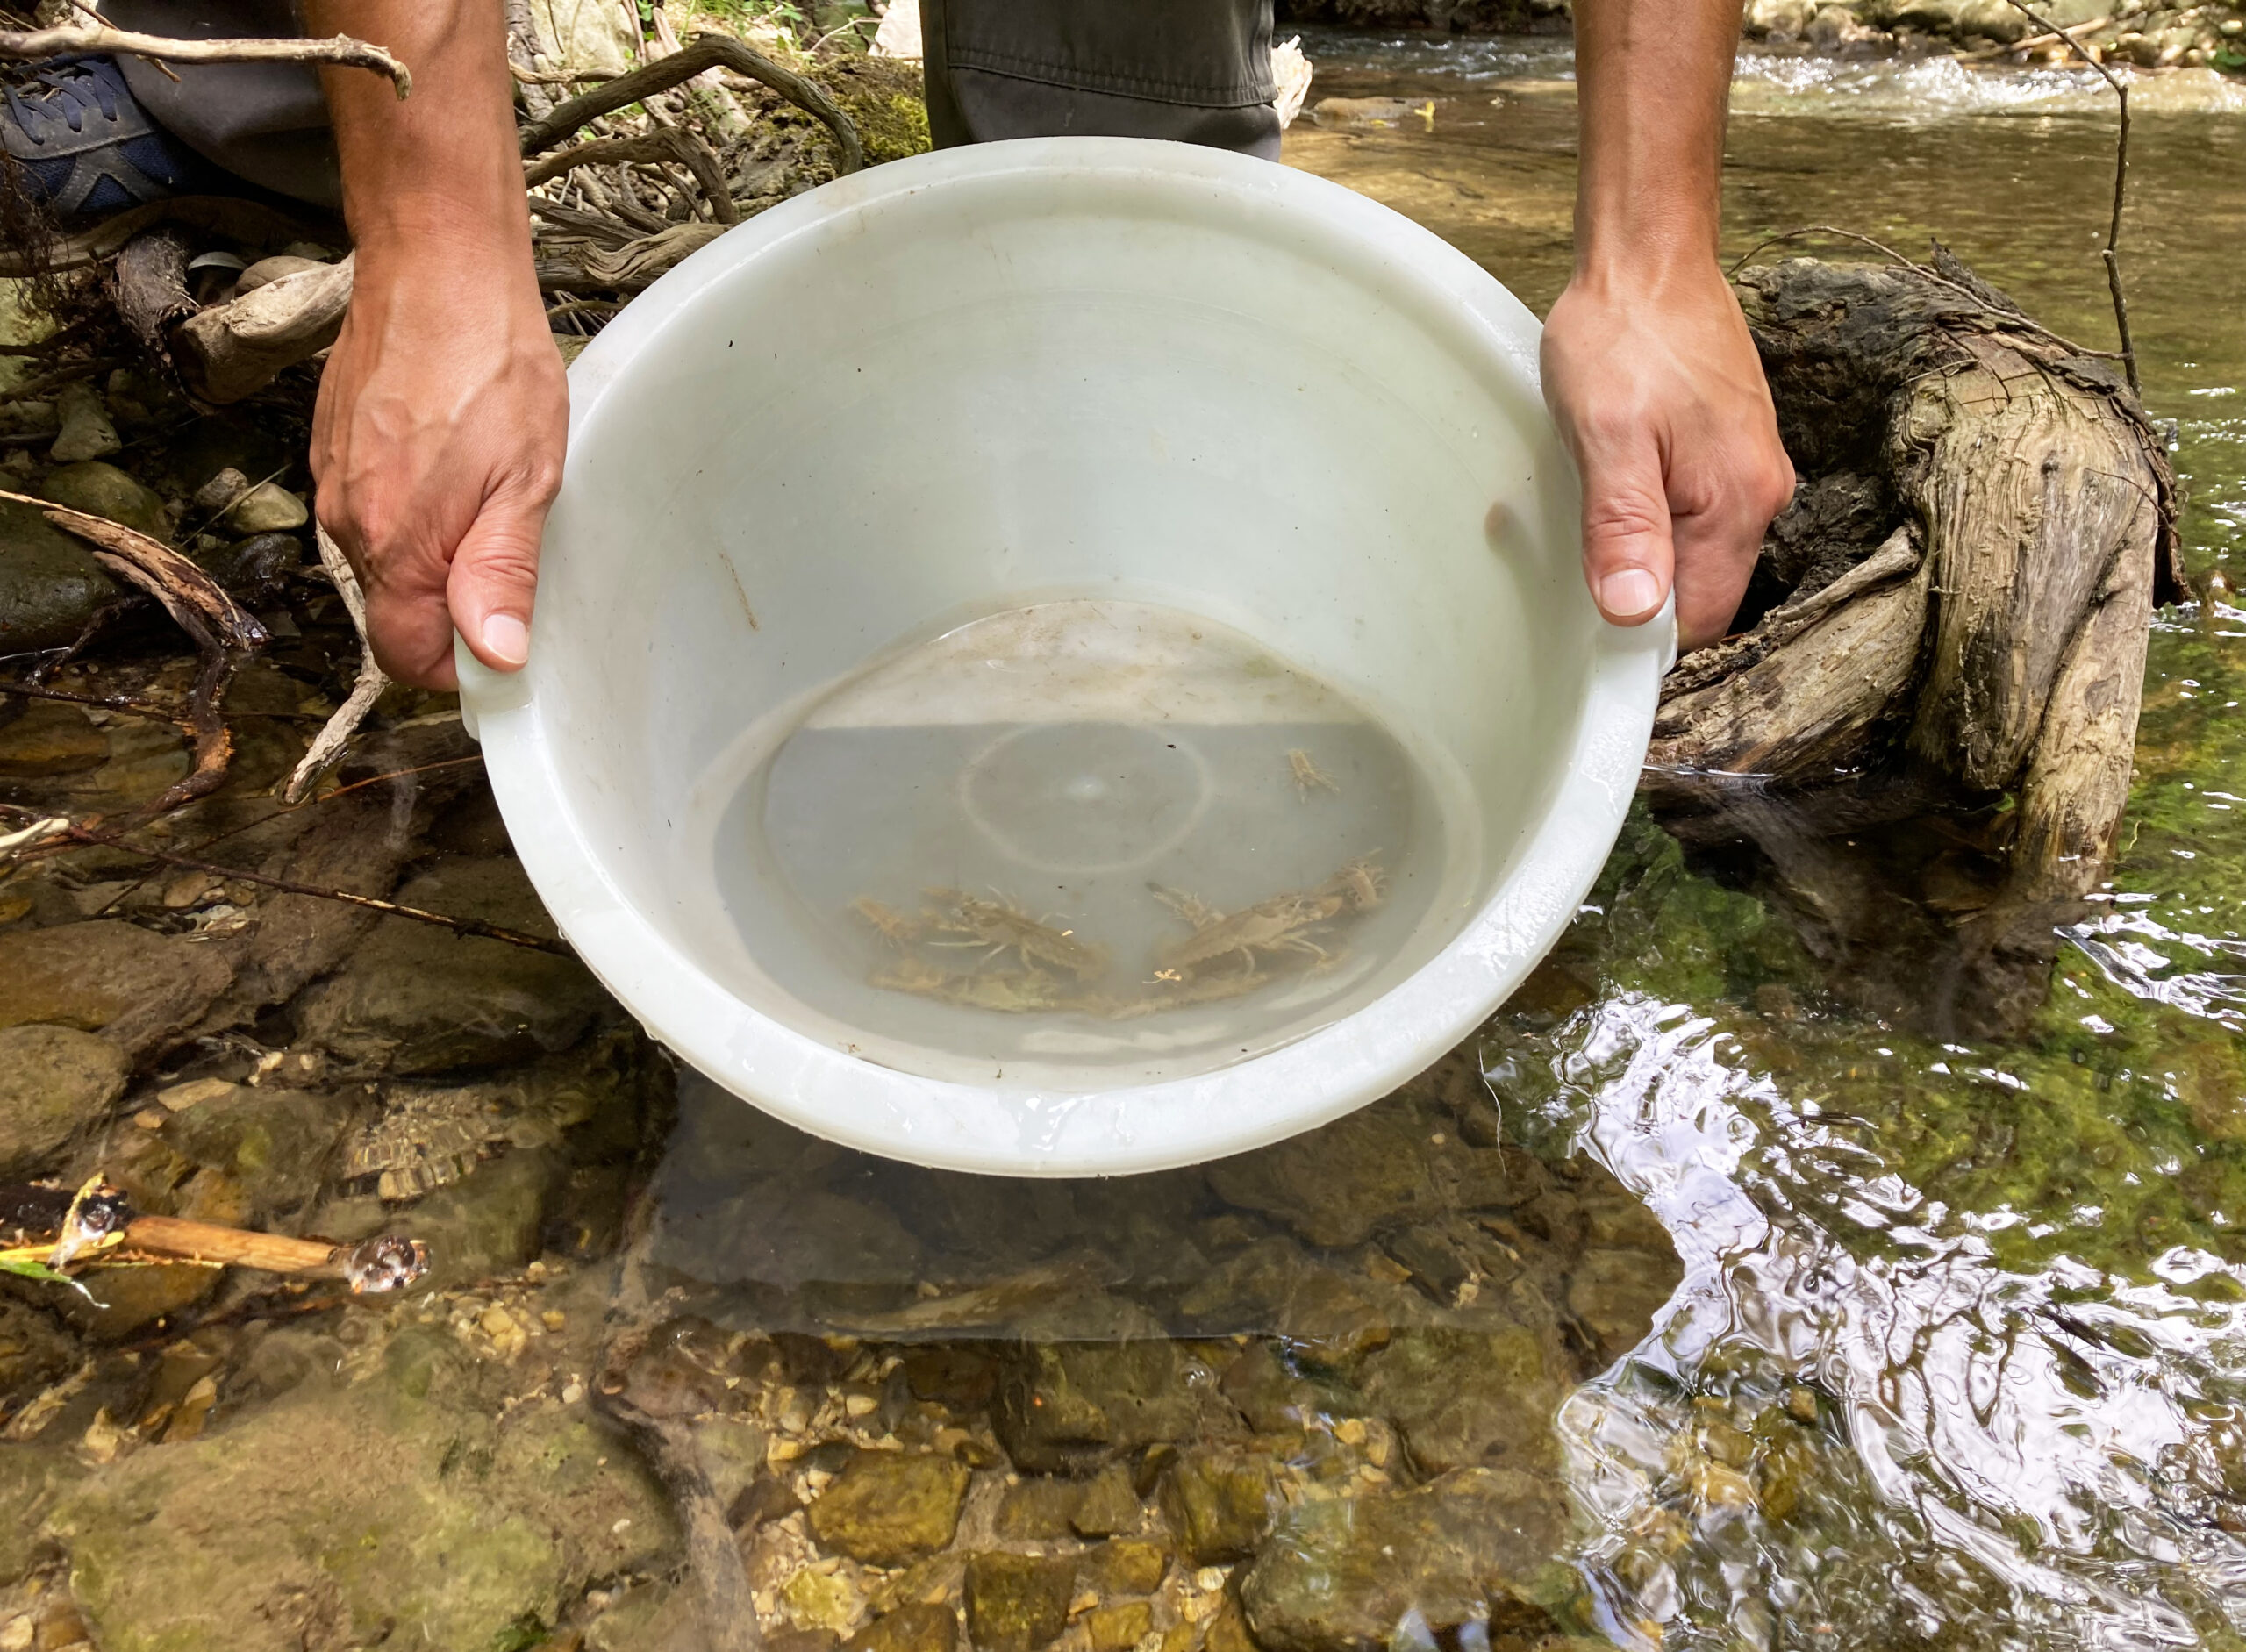 In total 387 juvenile white-clawed crayfish were released by the Rewilding Apennines team in June.